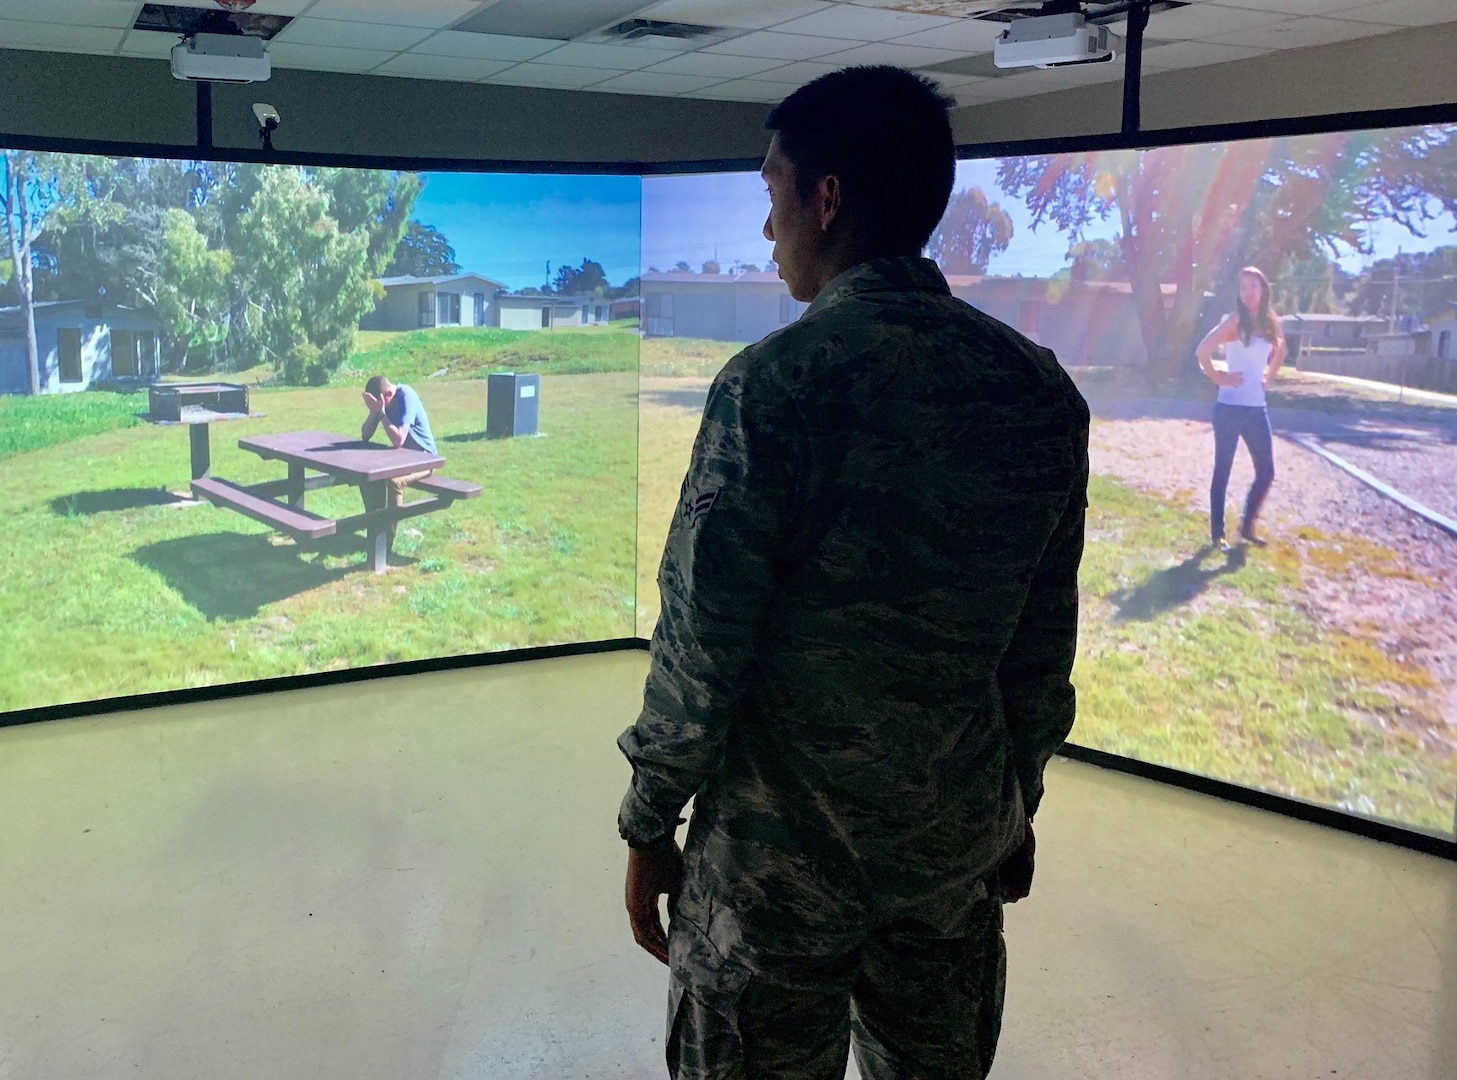 Airman 1st Class Valric Suyom, a recent graduate of the Security Forces apprentice course, participates in a use of force training scenario in the Multiple Interactive Learning Objectives, or MILO, simulator at Joint Base San Antonio-Lackland May 29. The 343rd Training Squadron has six MILO systems in place at the JBSA-Lackland Medina Annex training campus, including two 180-degree video theater systems, as well as four single-screen systems.